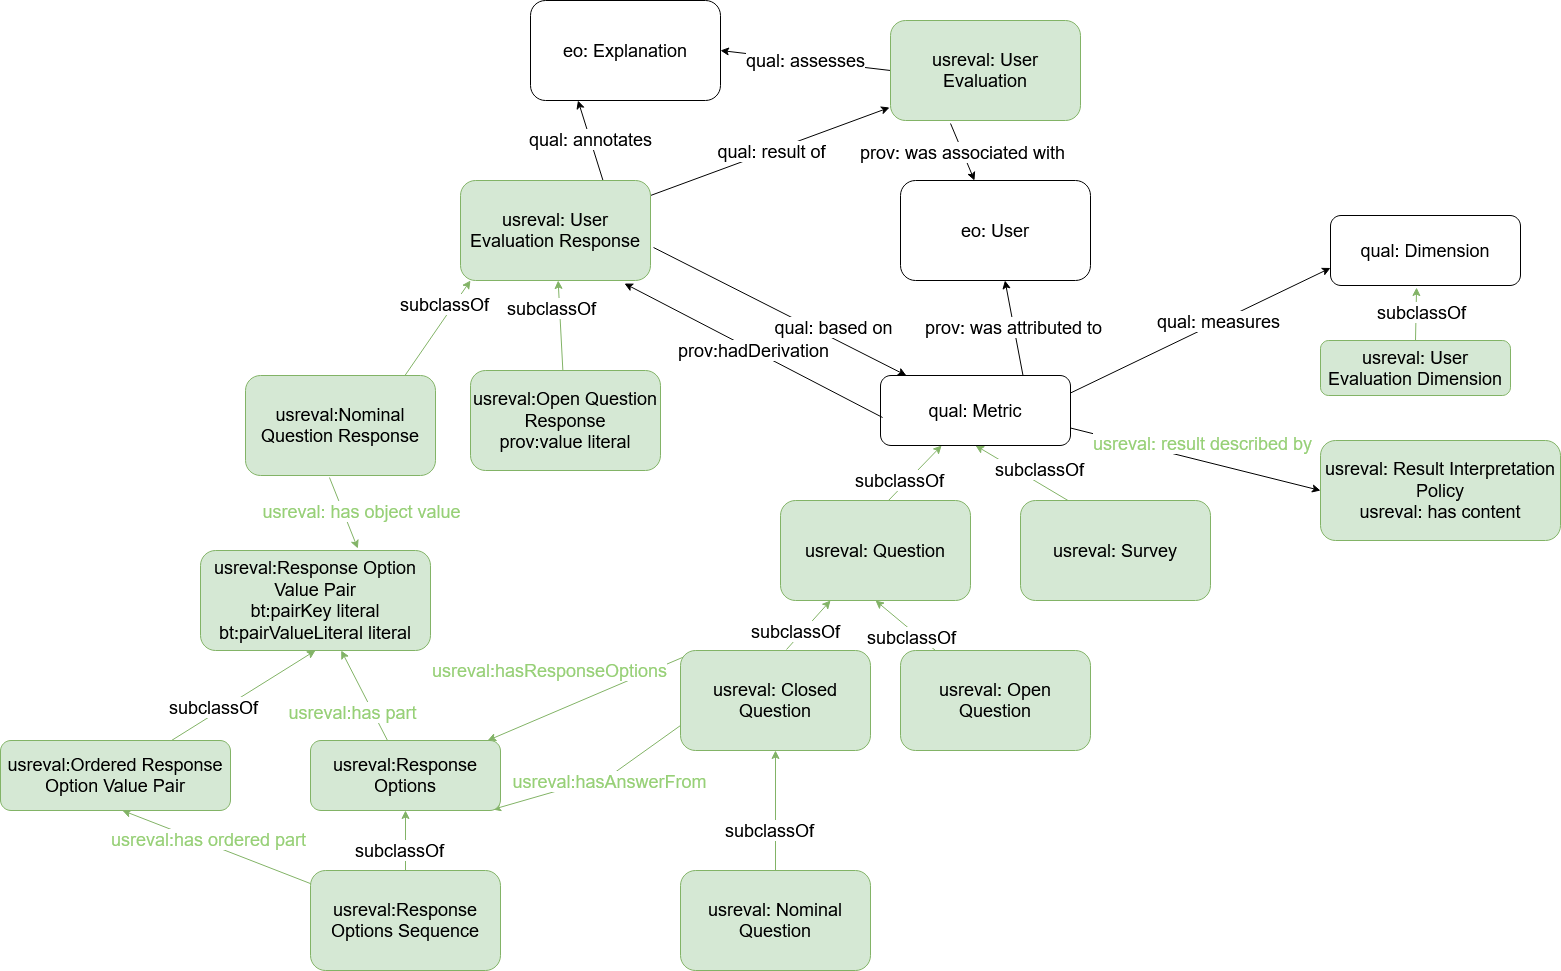 Outline of the  User Evaluationl ontology main classes and relationships